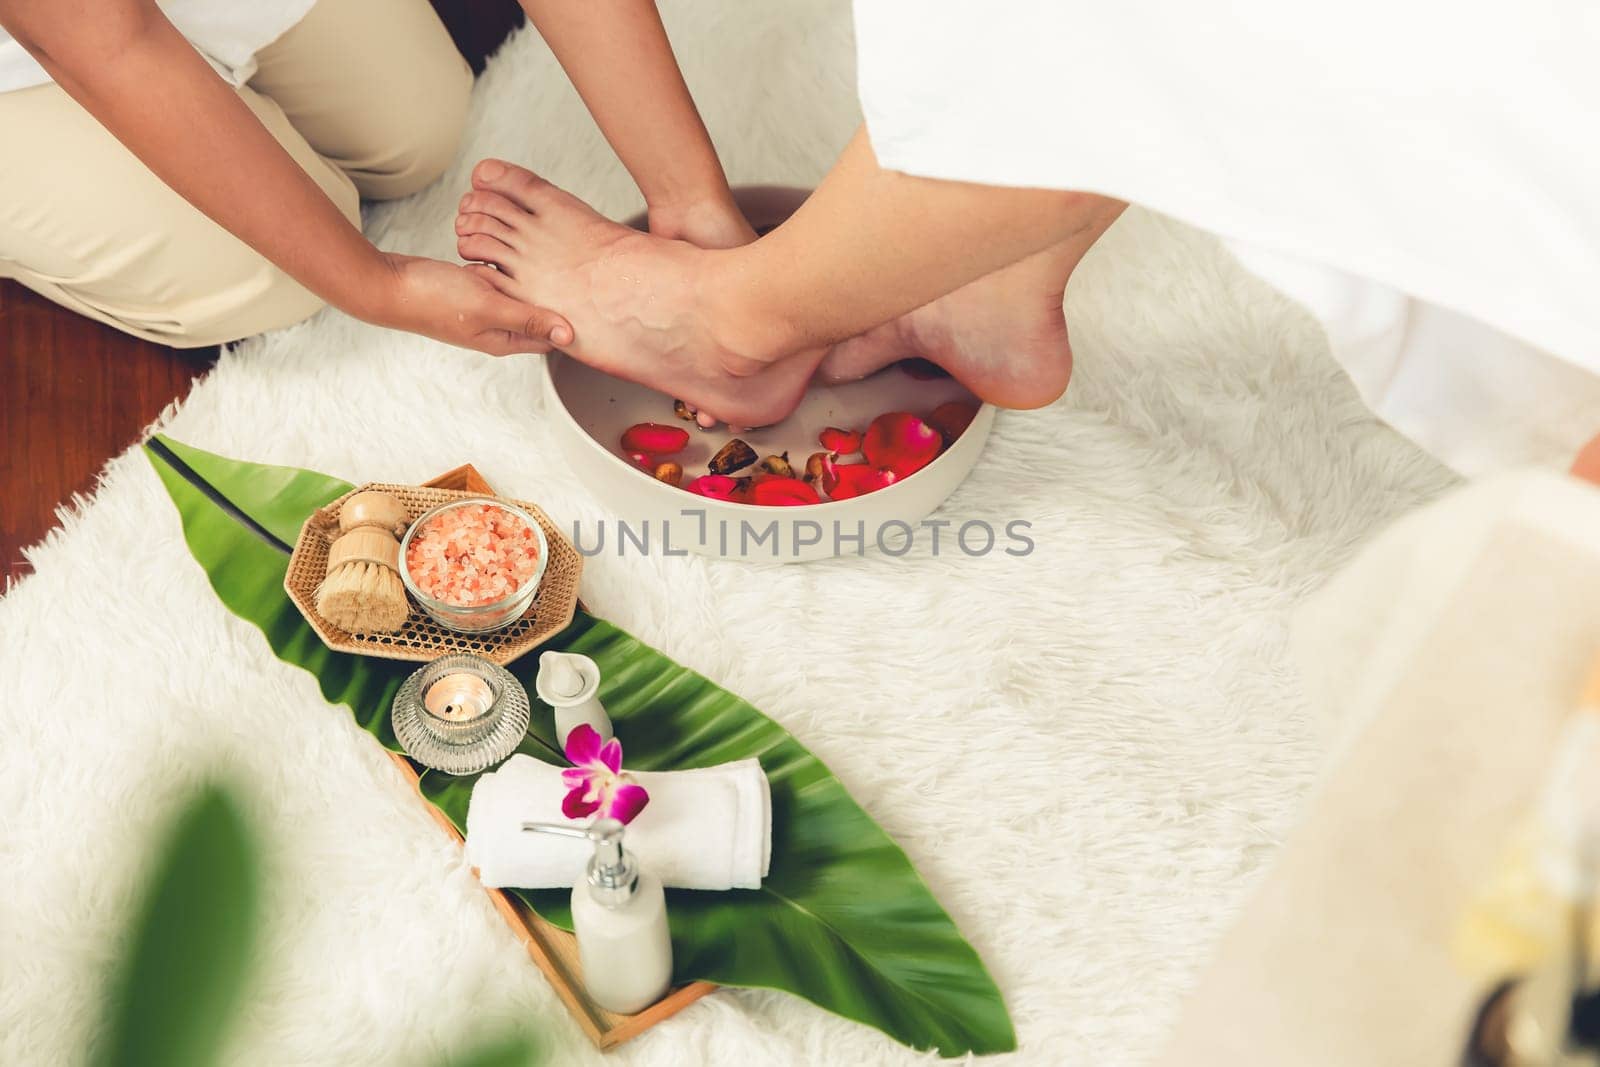 Man indulges in blissful foot massage at luxurious spa salon while masseur give reflexology therapy in gentle day light ambiance resort or hotel foot spa. Quiescent